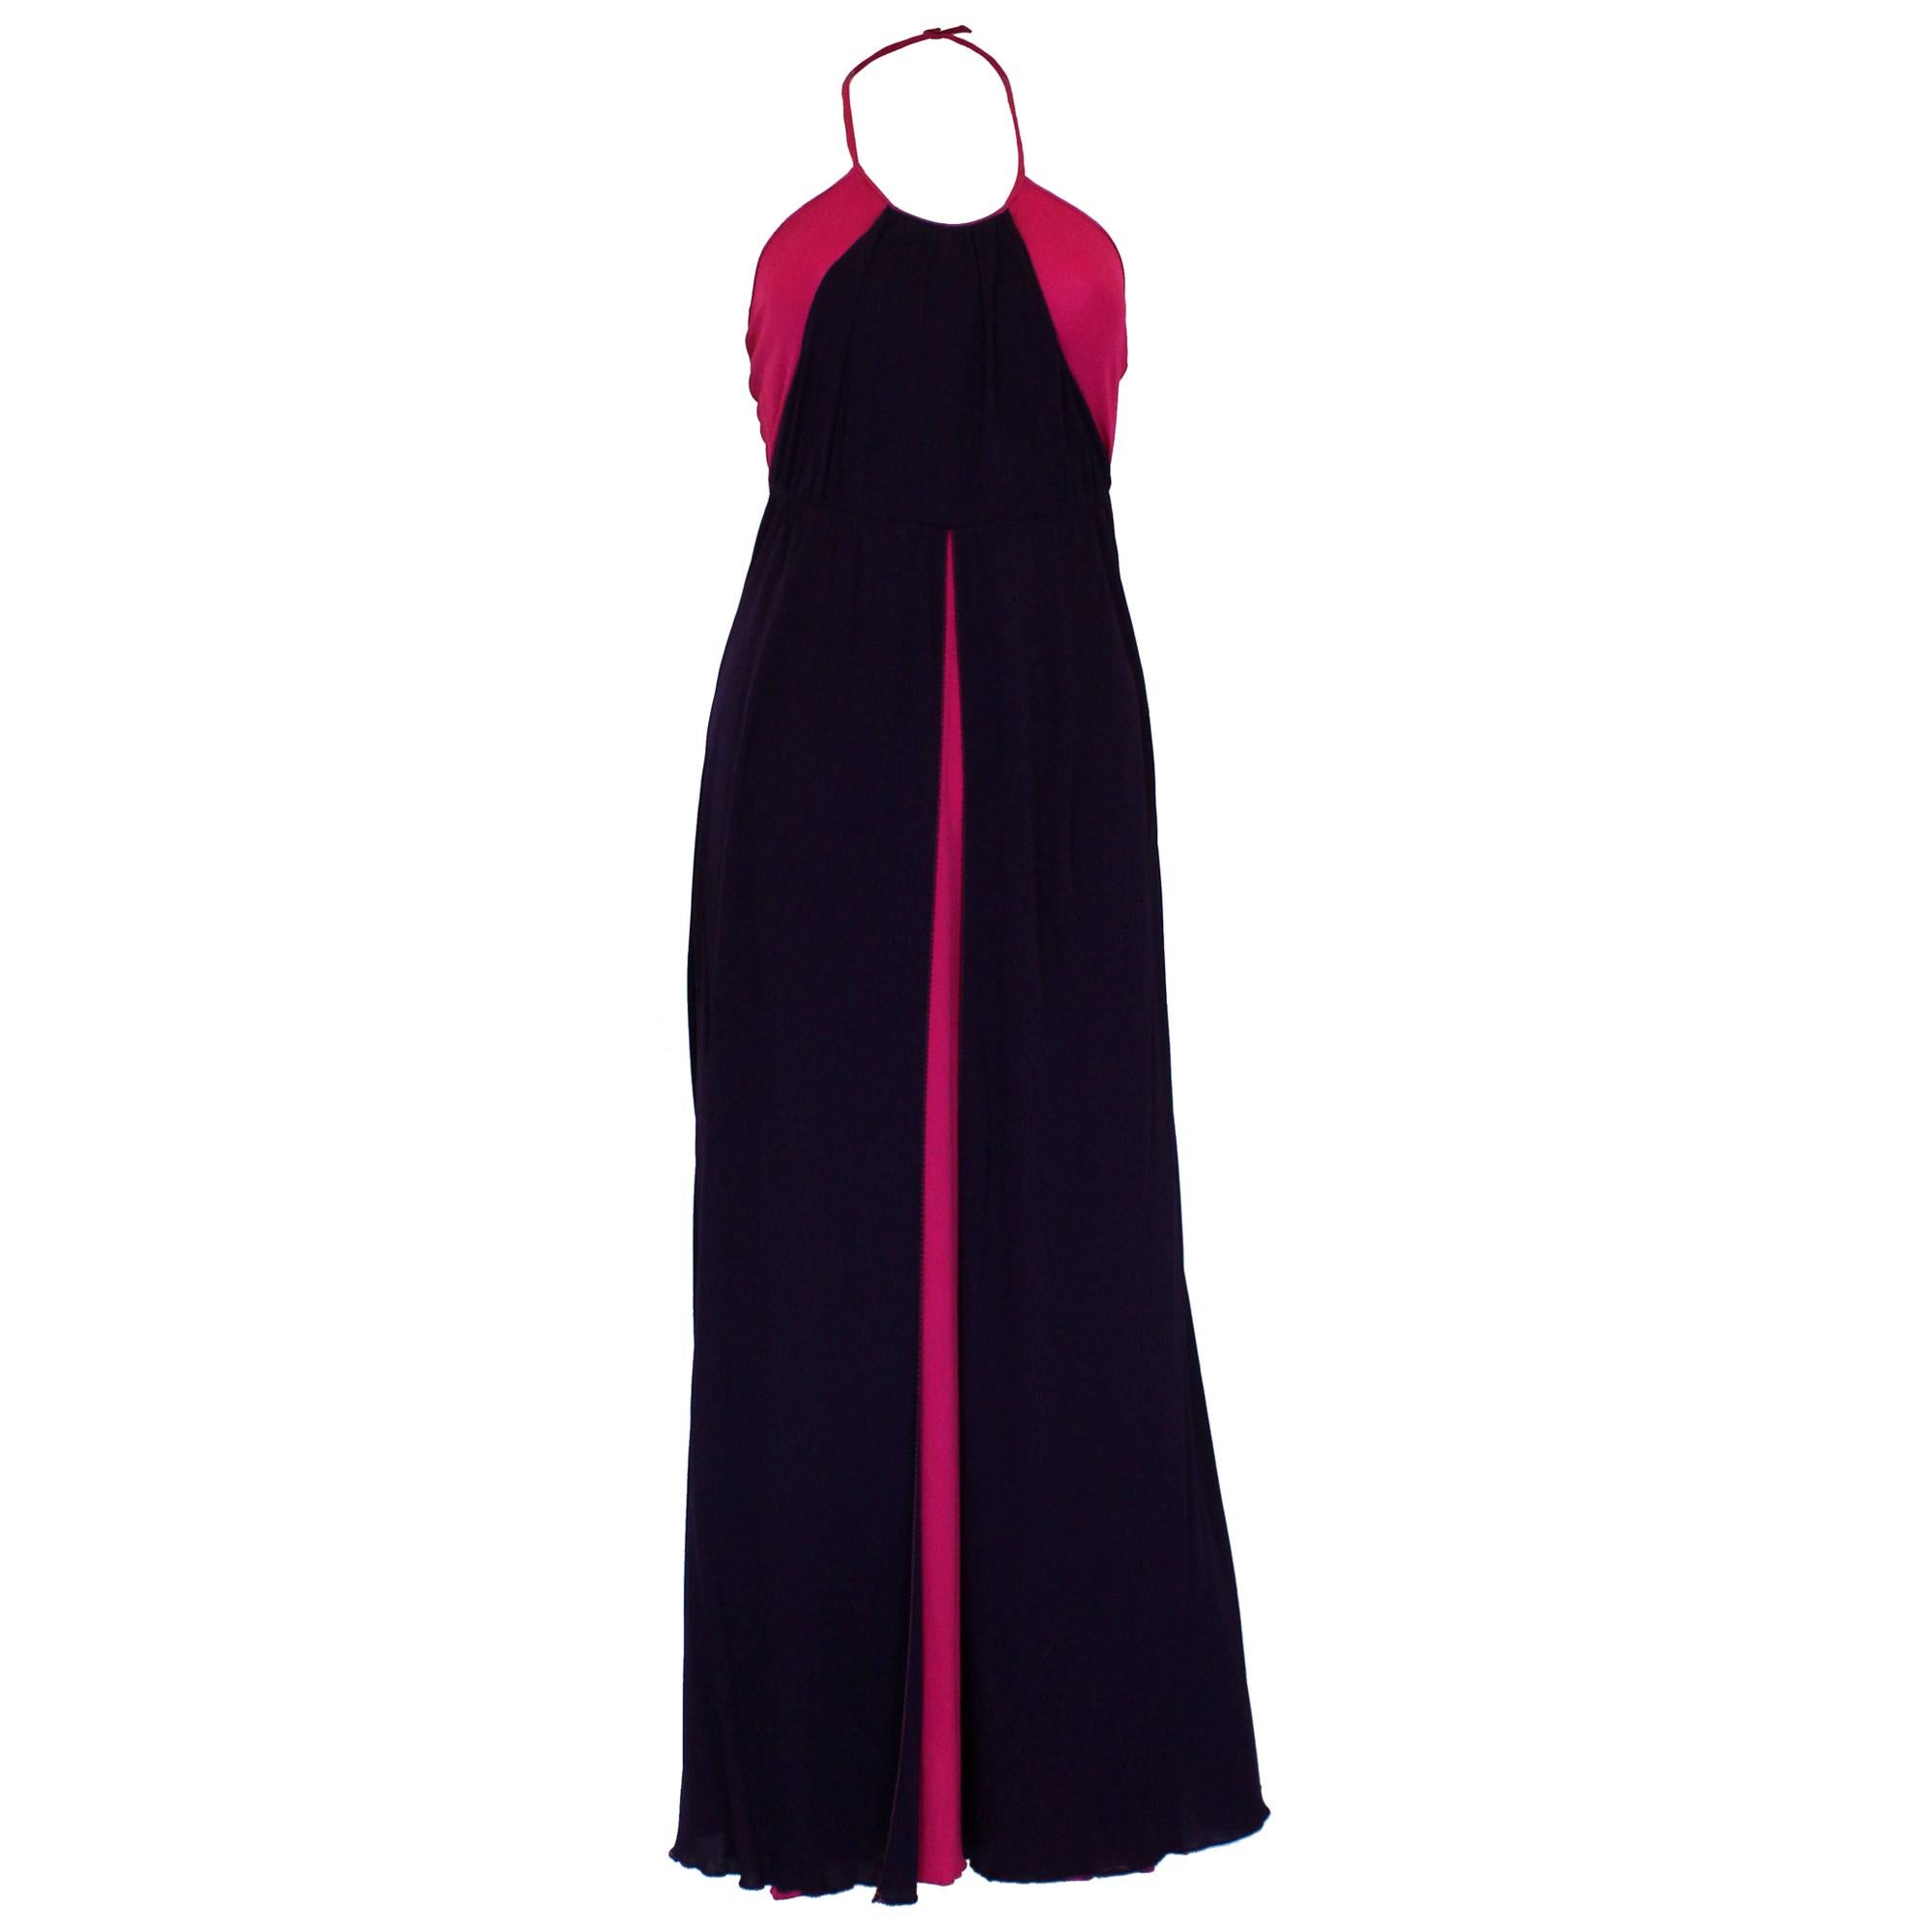 Stunning vintage pink and purple gown by Bruce Oldfield